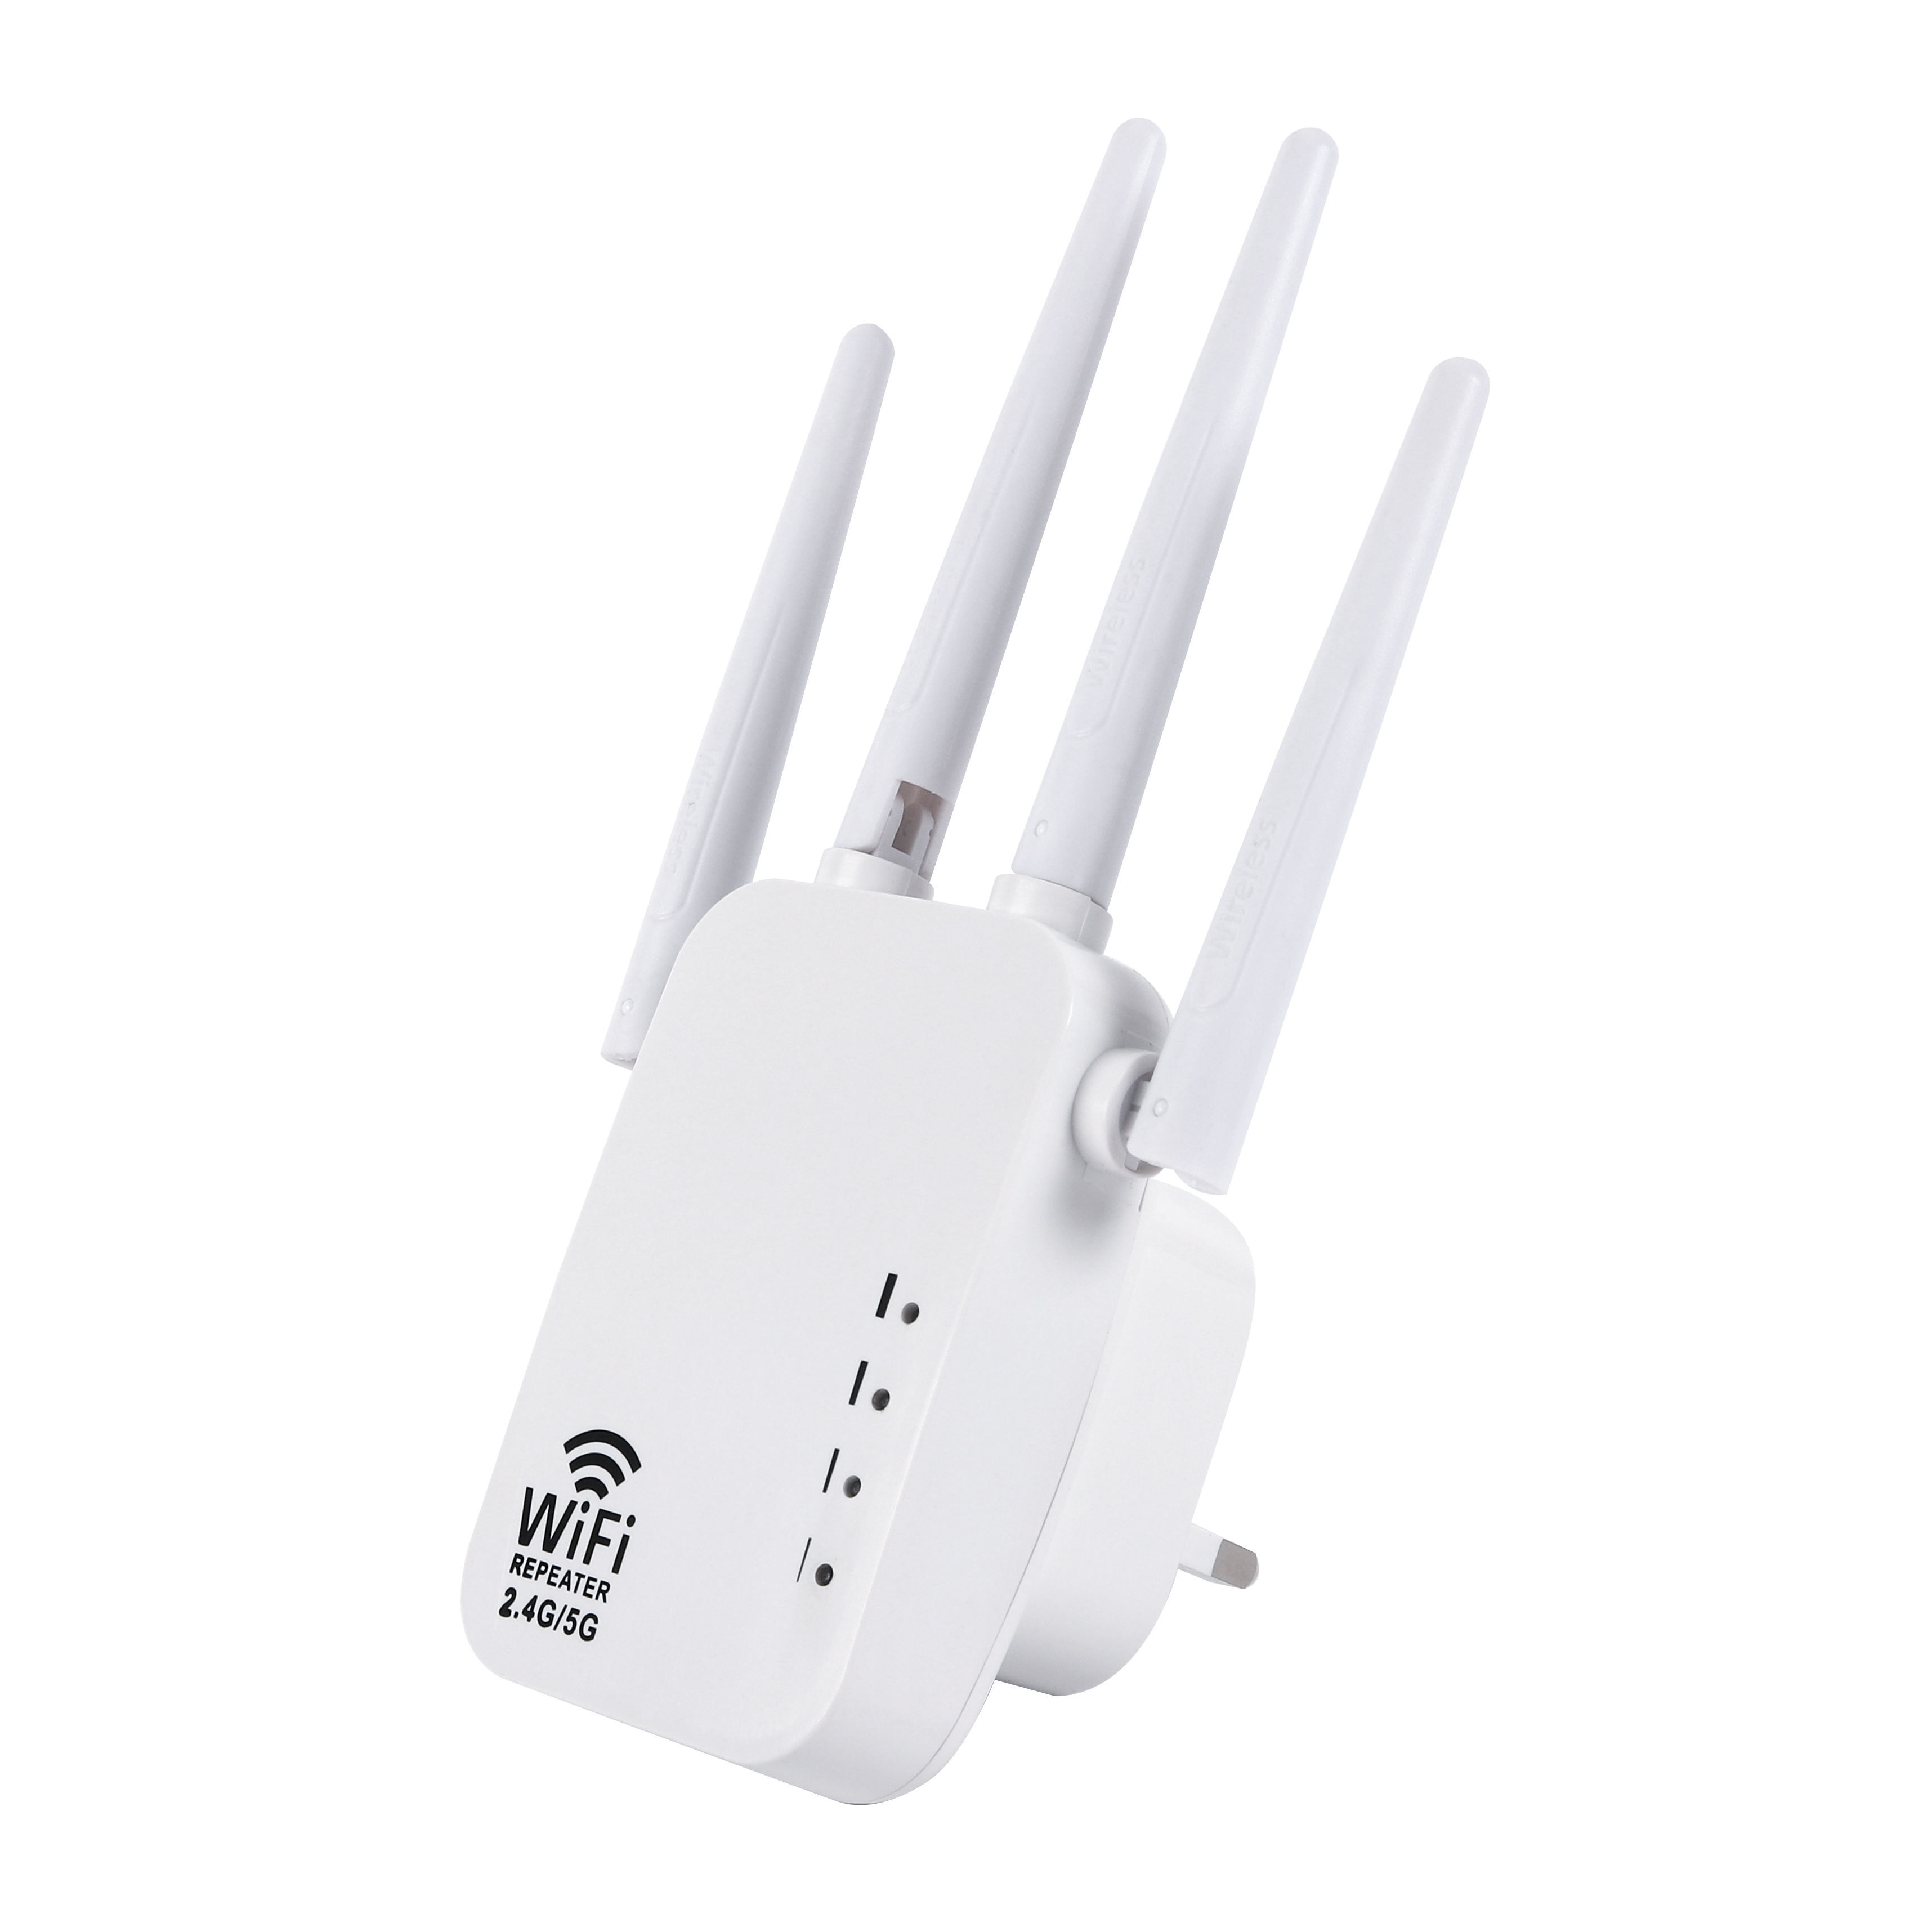 China 802.11ac WiFi Long Range Extender 2.4G 5Ghz Wifi Access Points factory